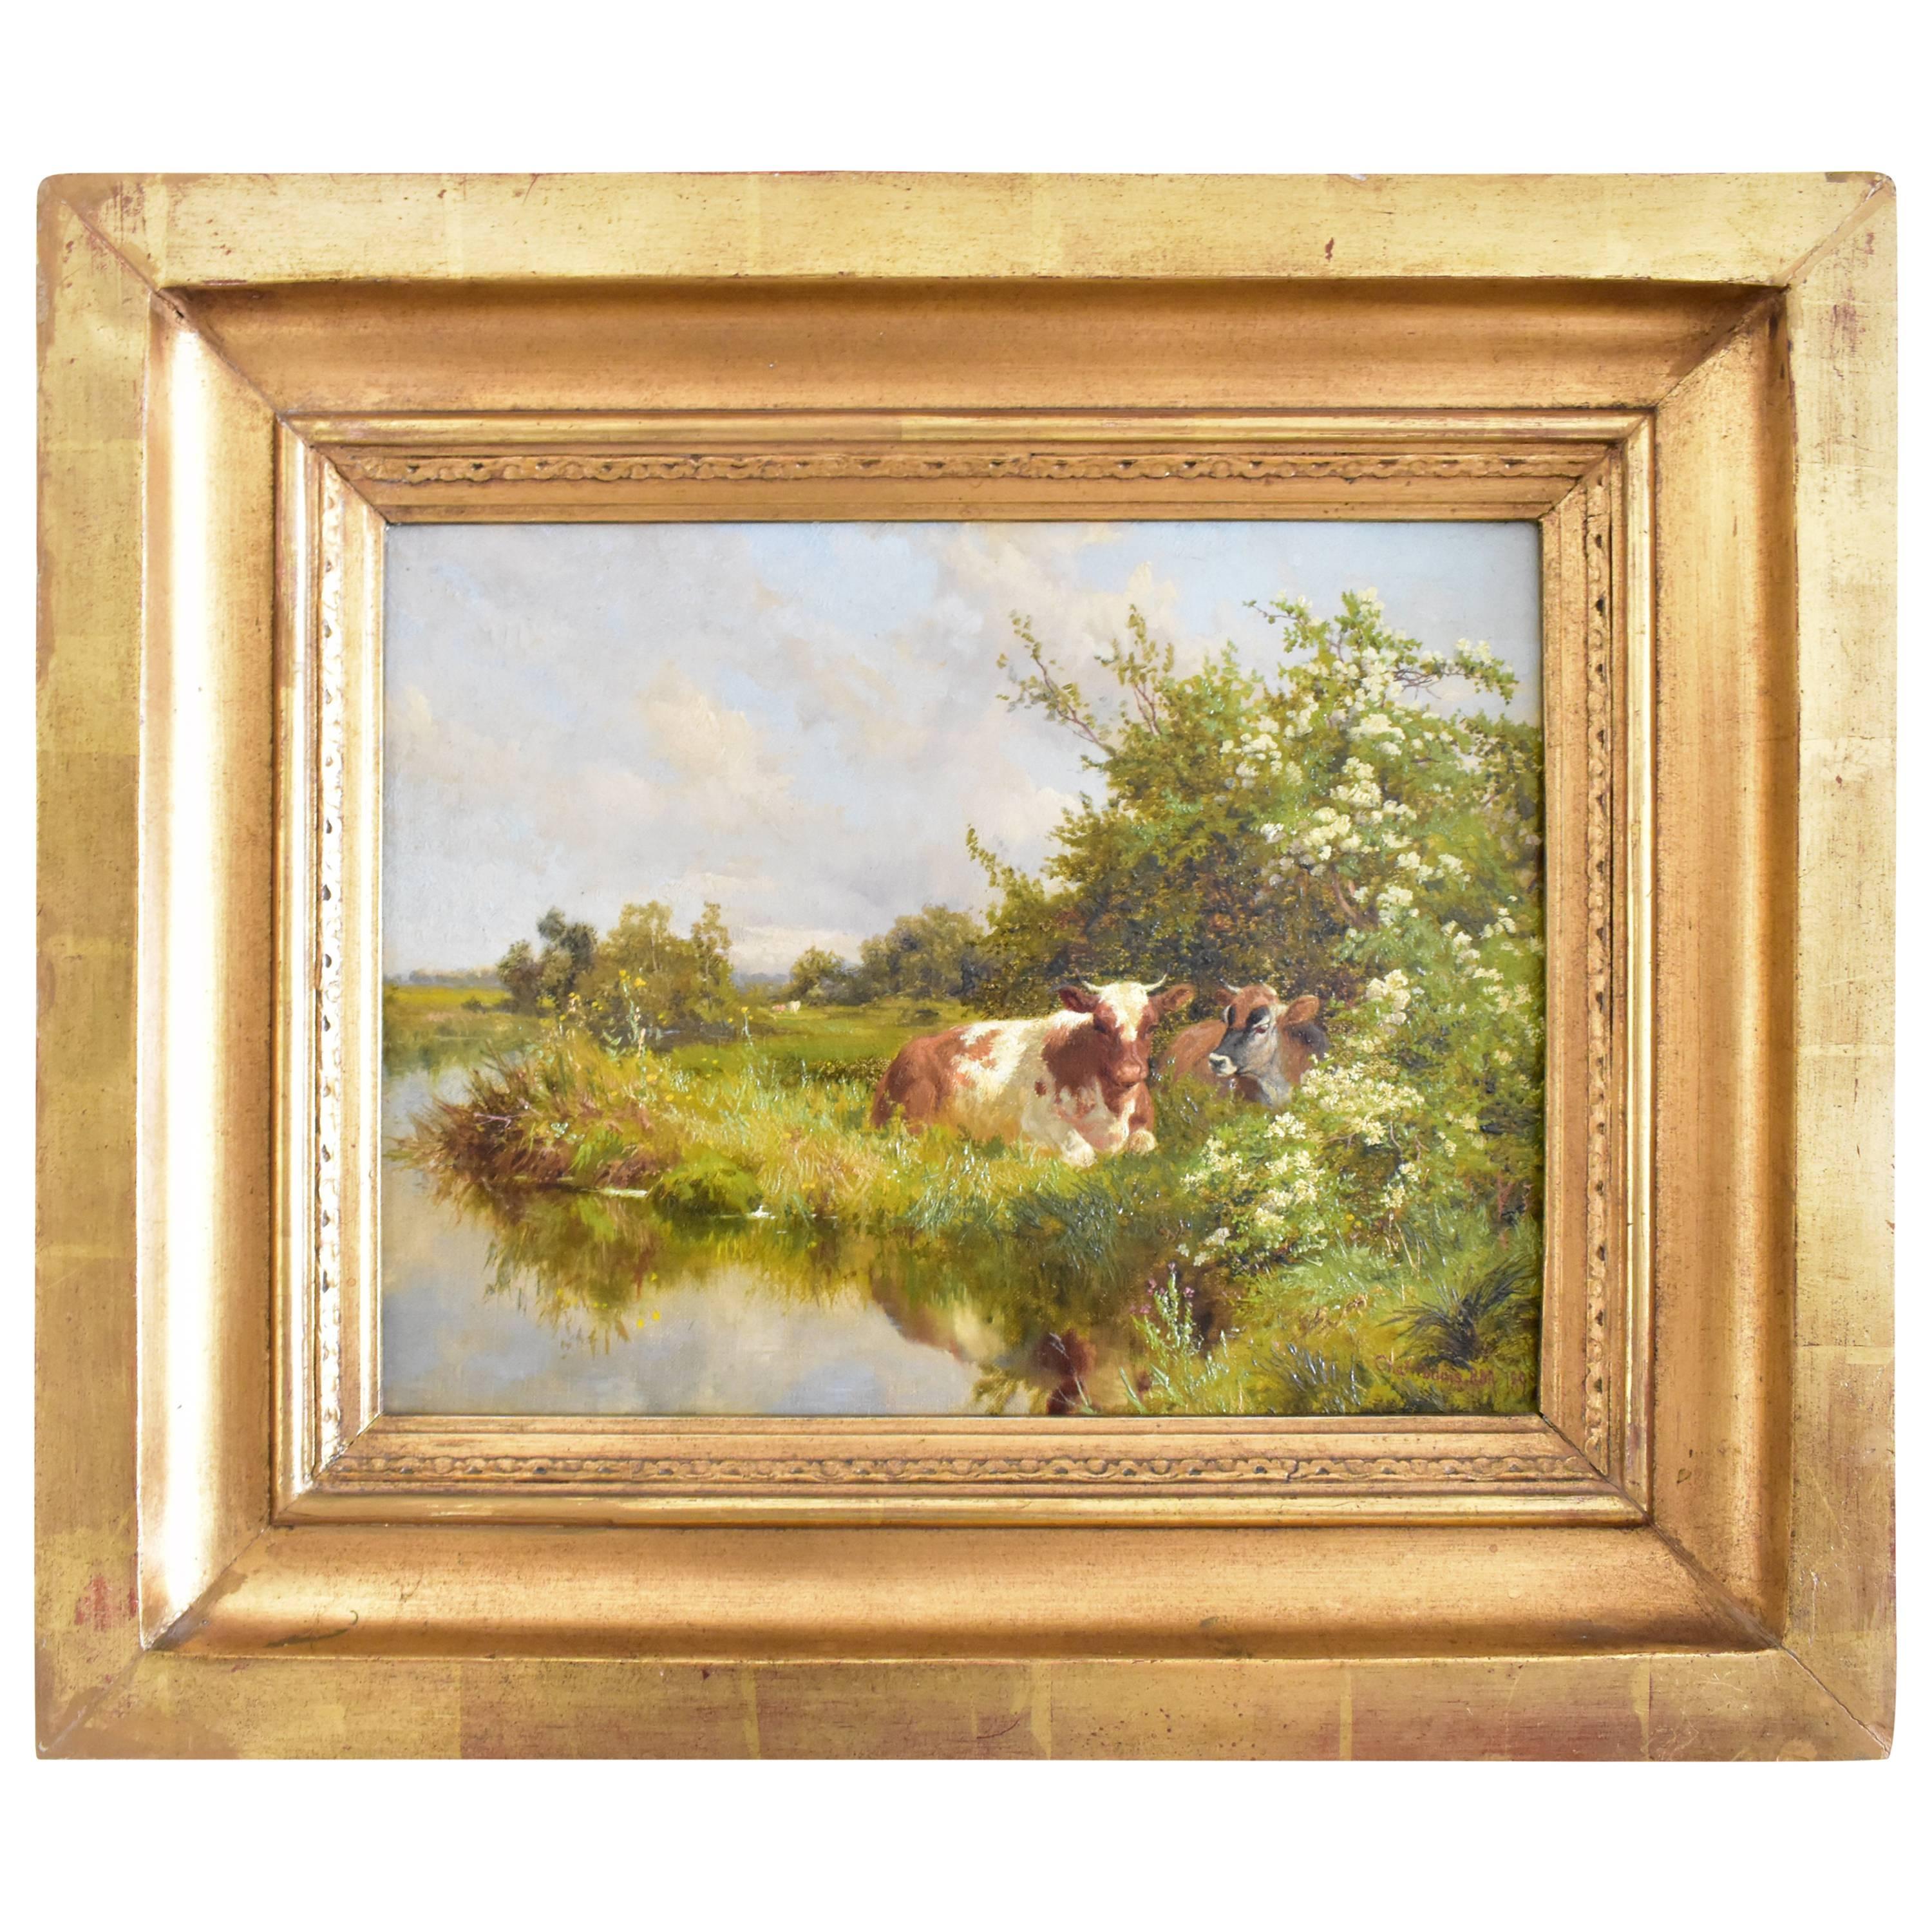 Oil on Canvas Painting by Charles Collins "Cattle by a Stream" 1897 Signed Dated For Sale